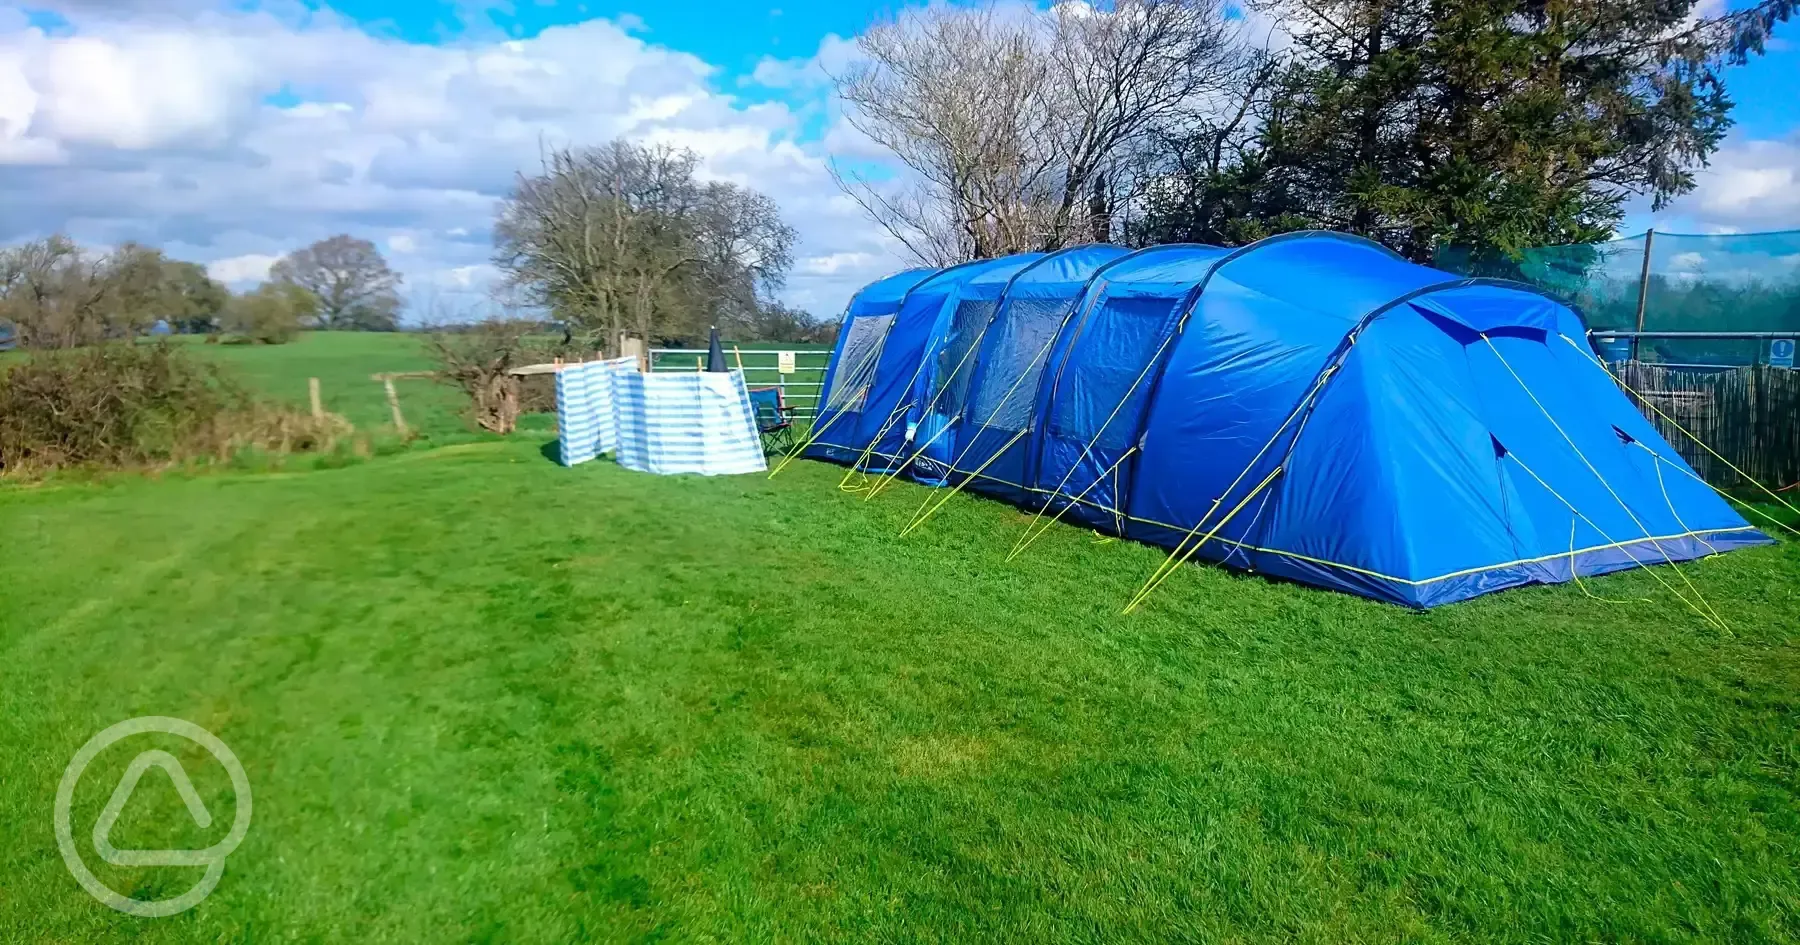 Extra Large size tent Tent up to 8mtrs. Jumbo pitch